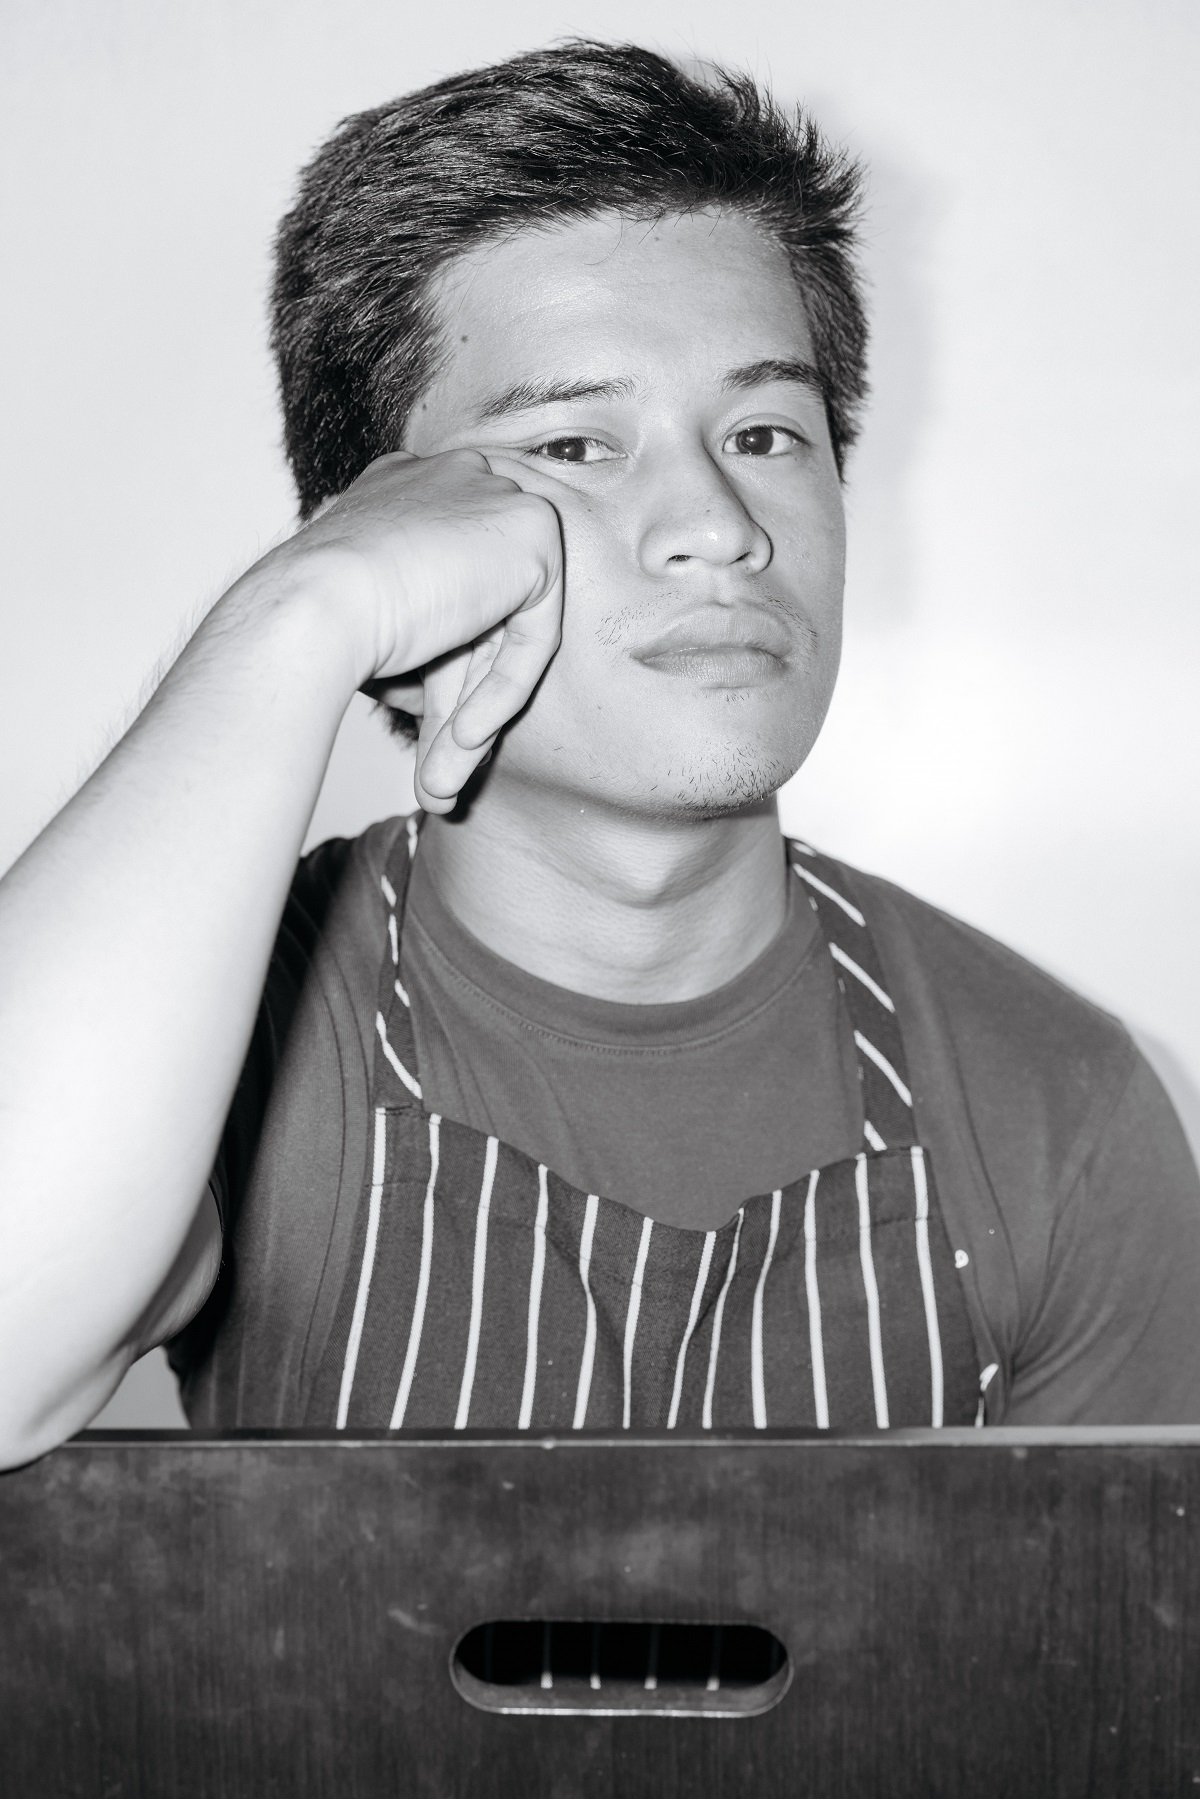 Raphael Cristobal, head chef at Purple Yam Malate, has the makings of a celebrity chef